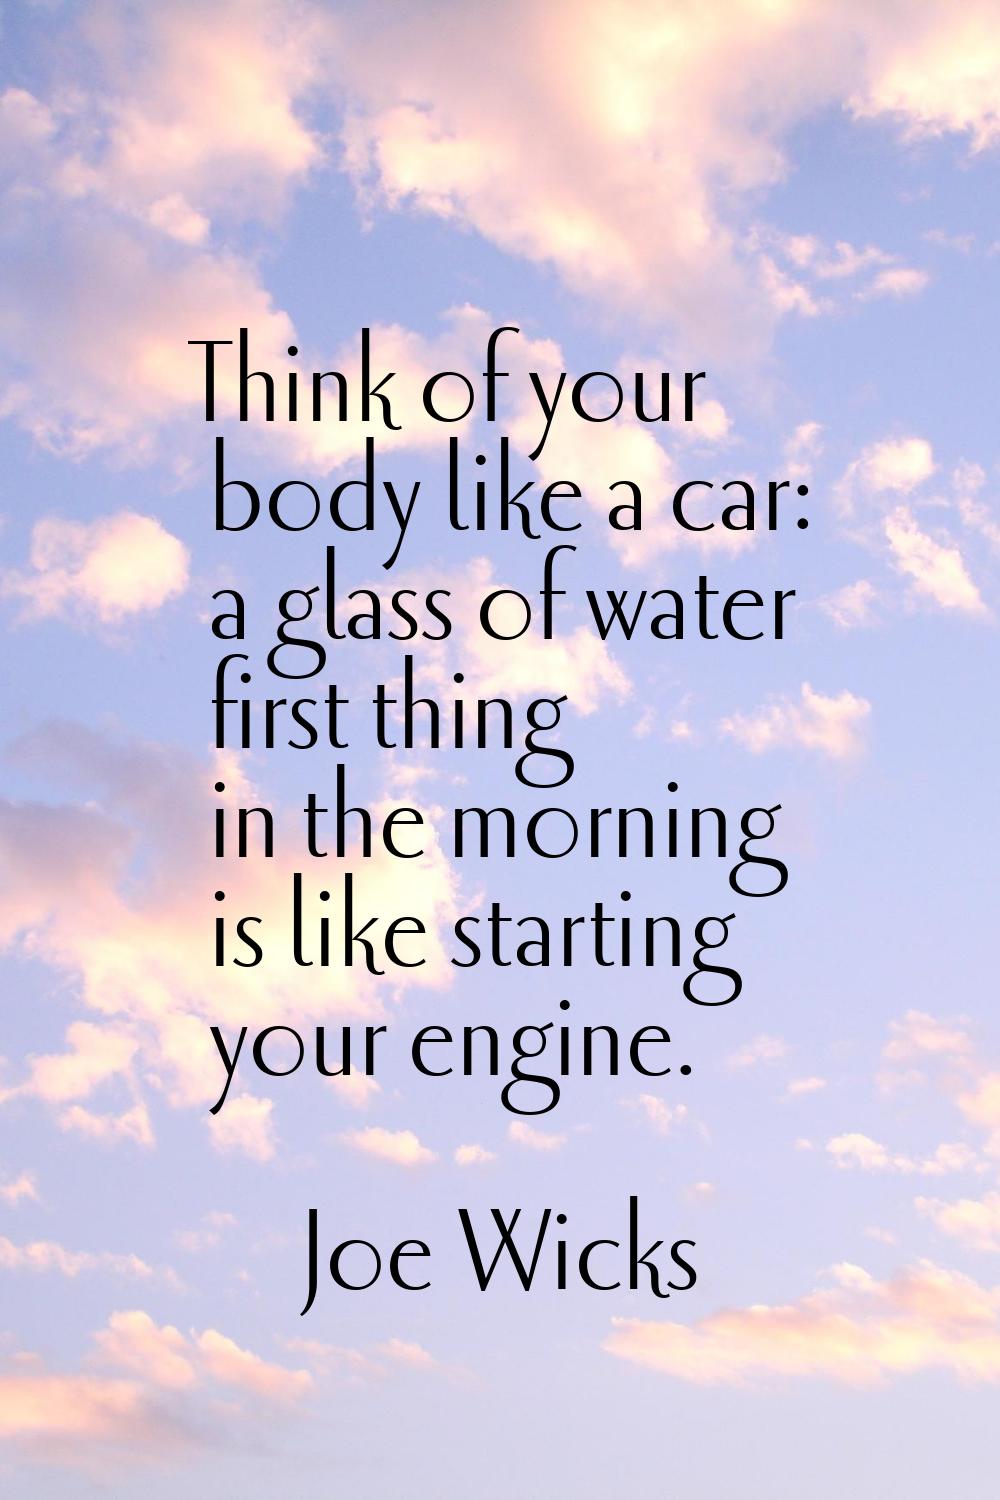 Think of your body like a car: a glass of water first thing in the morning is like starting your en